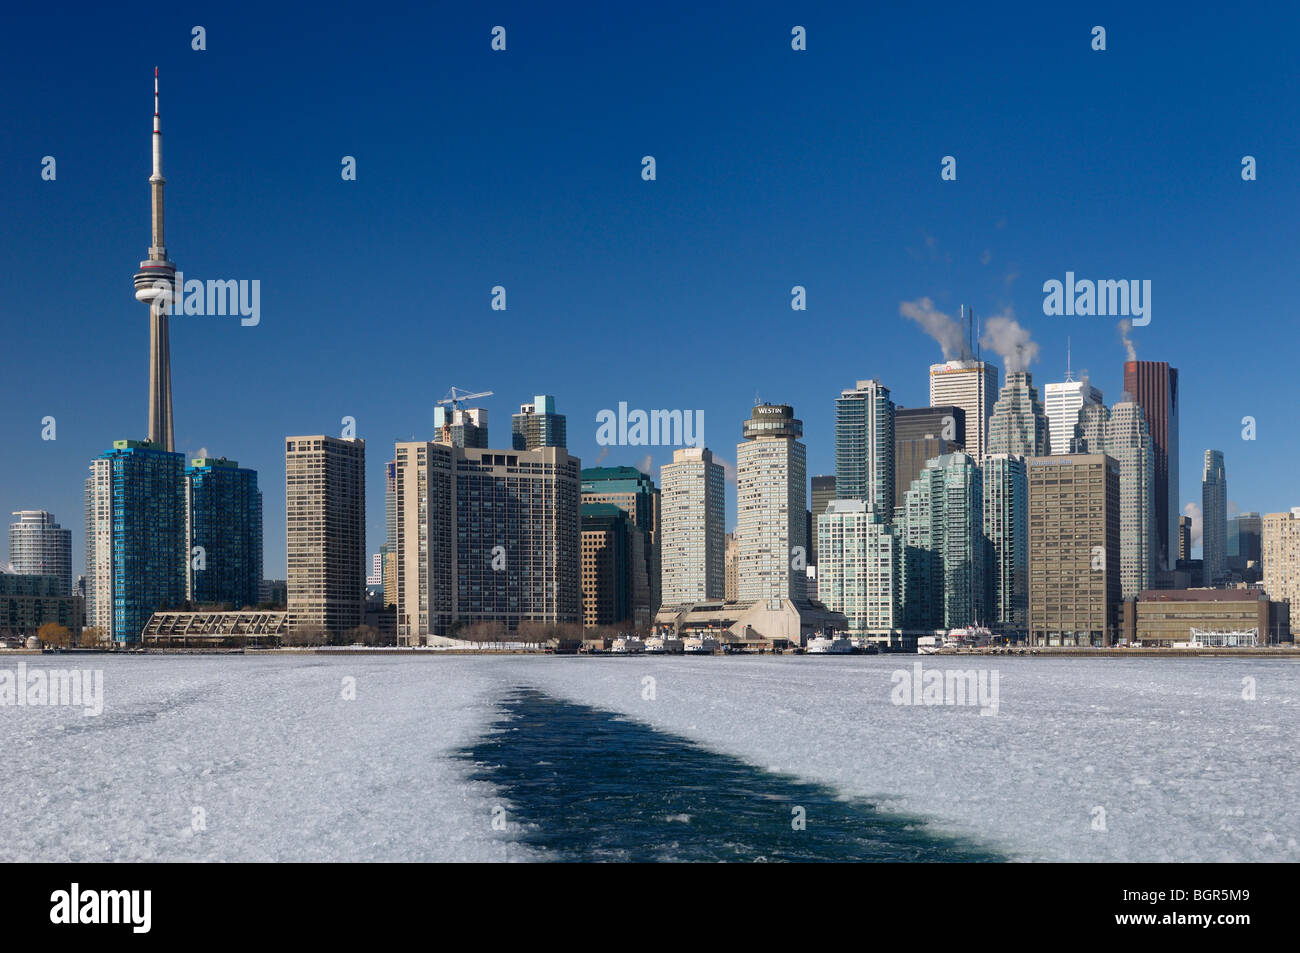 Wake of a winter ferry to the Toronto Islands keeping a channel open on an ice covered Lake Ontario with city skyline and ice slush Stock Photo